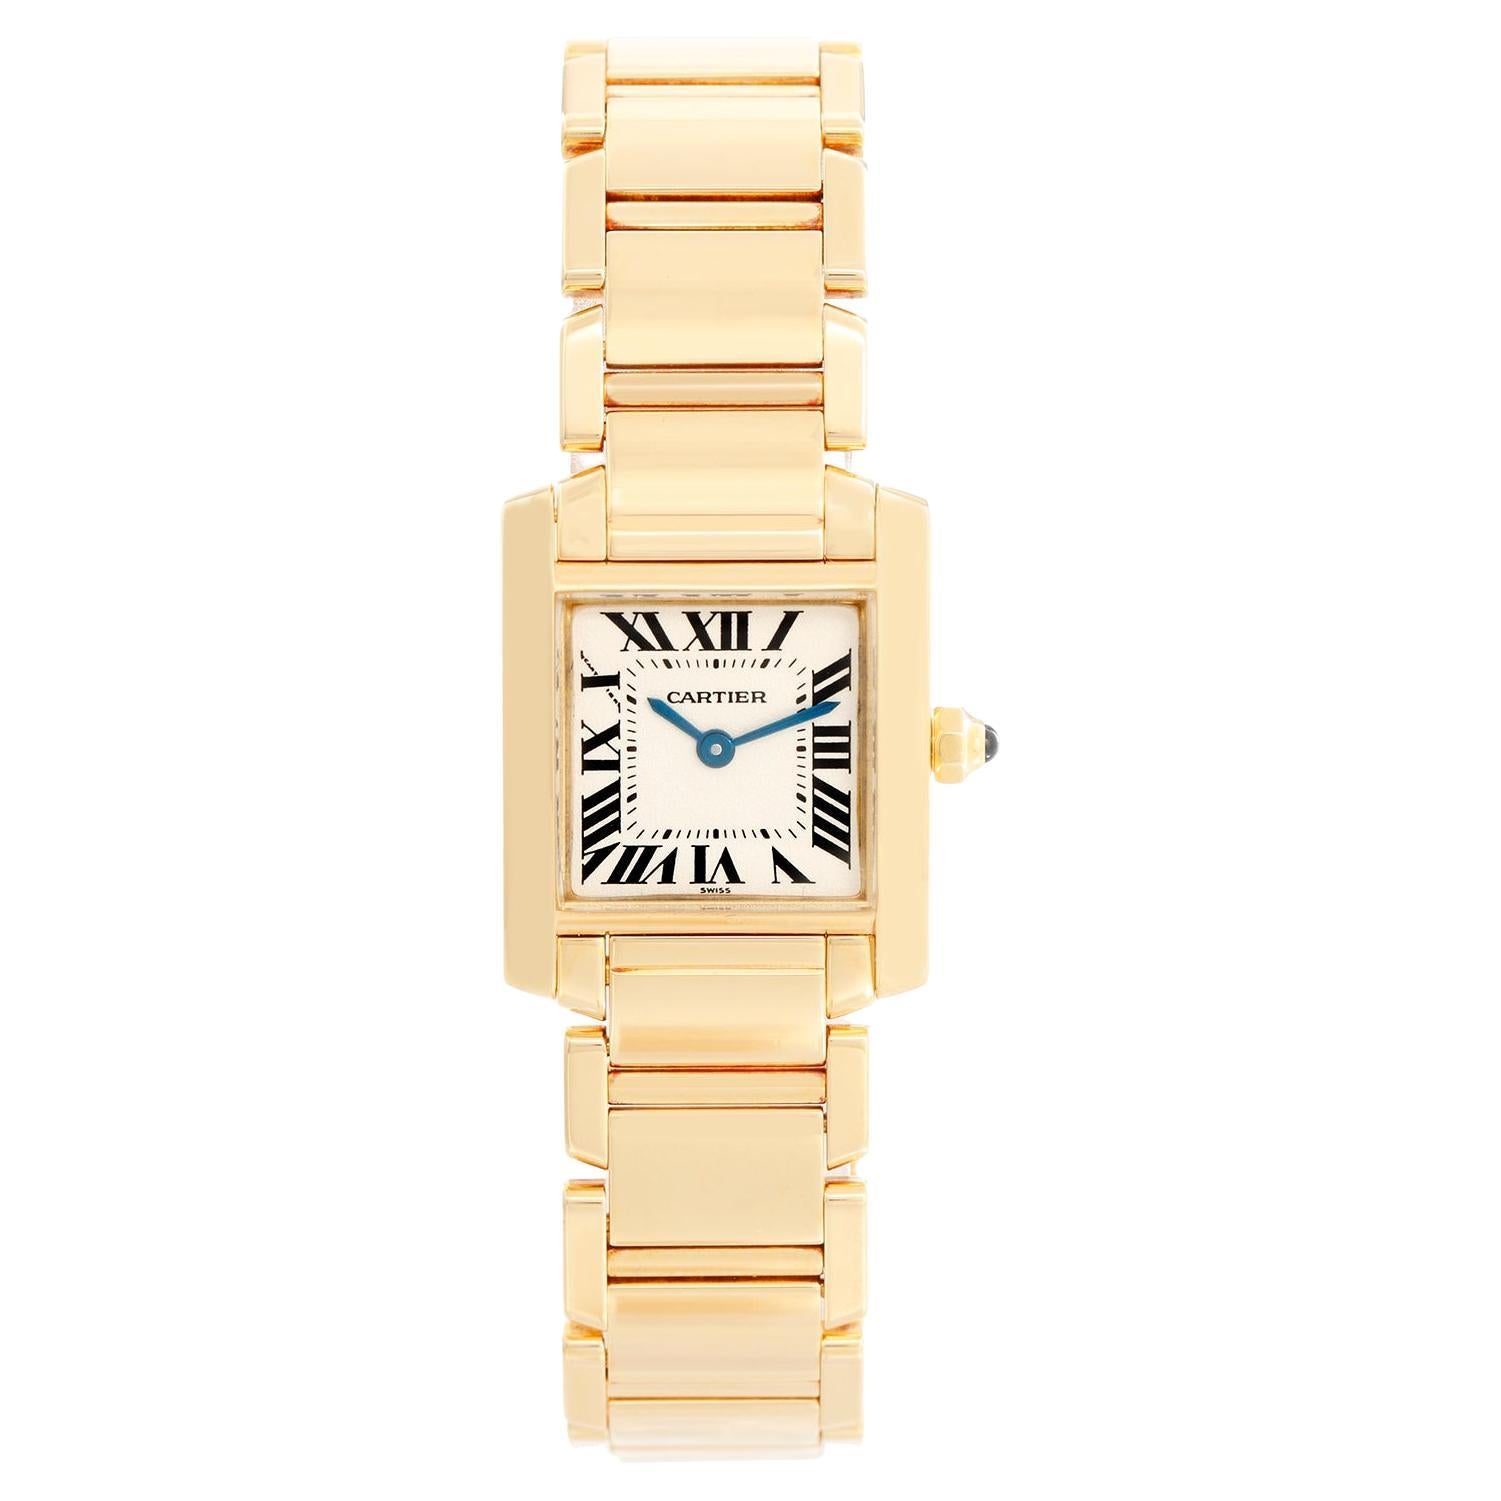 Cartier Tank Francaise 18k Yellow Gold Ladies Watch 1820